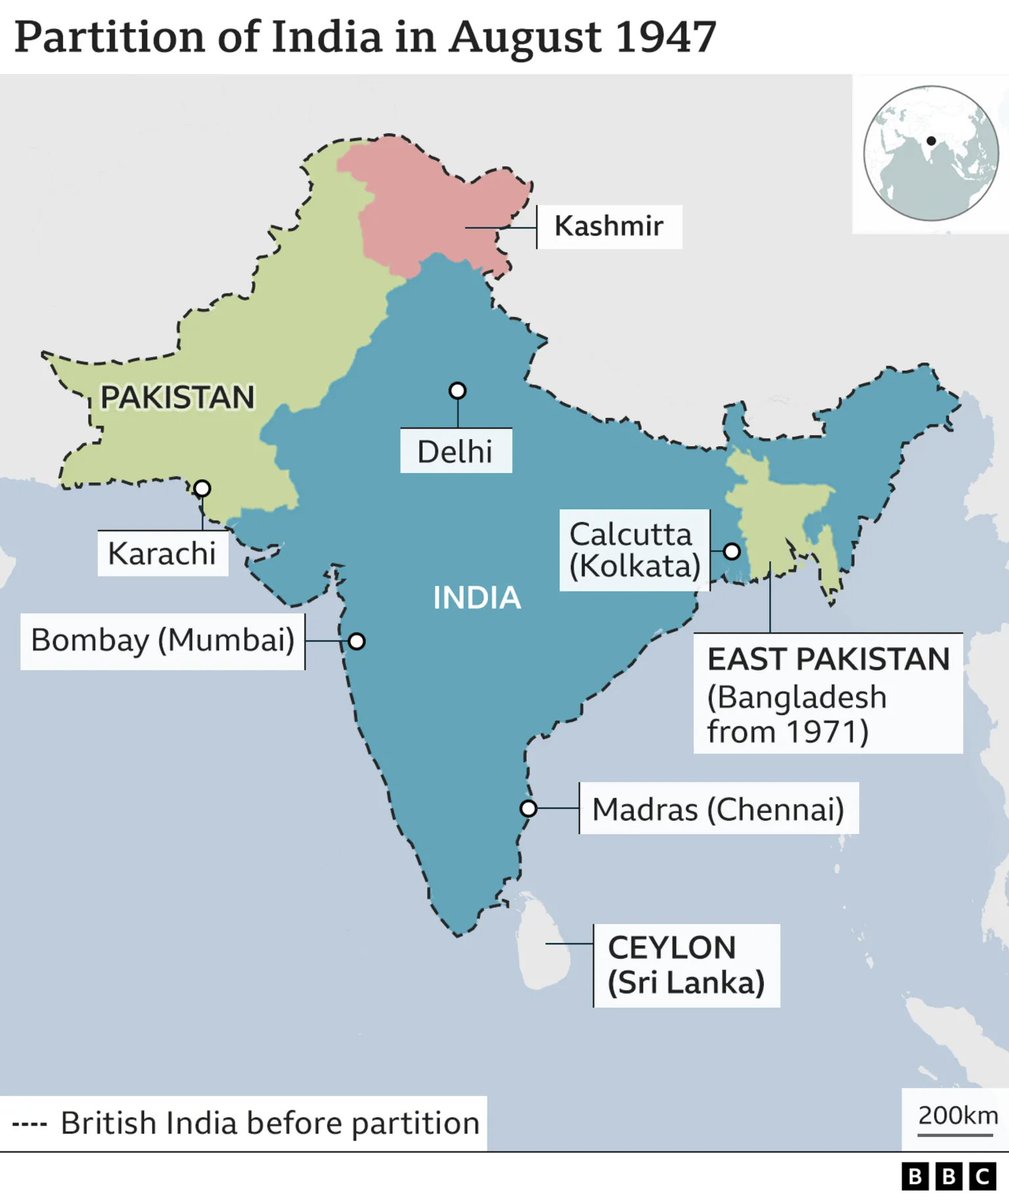 @bob4barrie You mean this partition of #India drawn by #British civil servant Sir Cyril Radcliffe? It led 15 million people to flee, often hundreds of miles, to avoid coming under rule of another faith & up to ~1 million of those #refugees were killed or died of disease in #refugee camps.